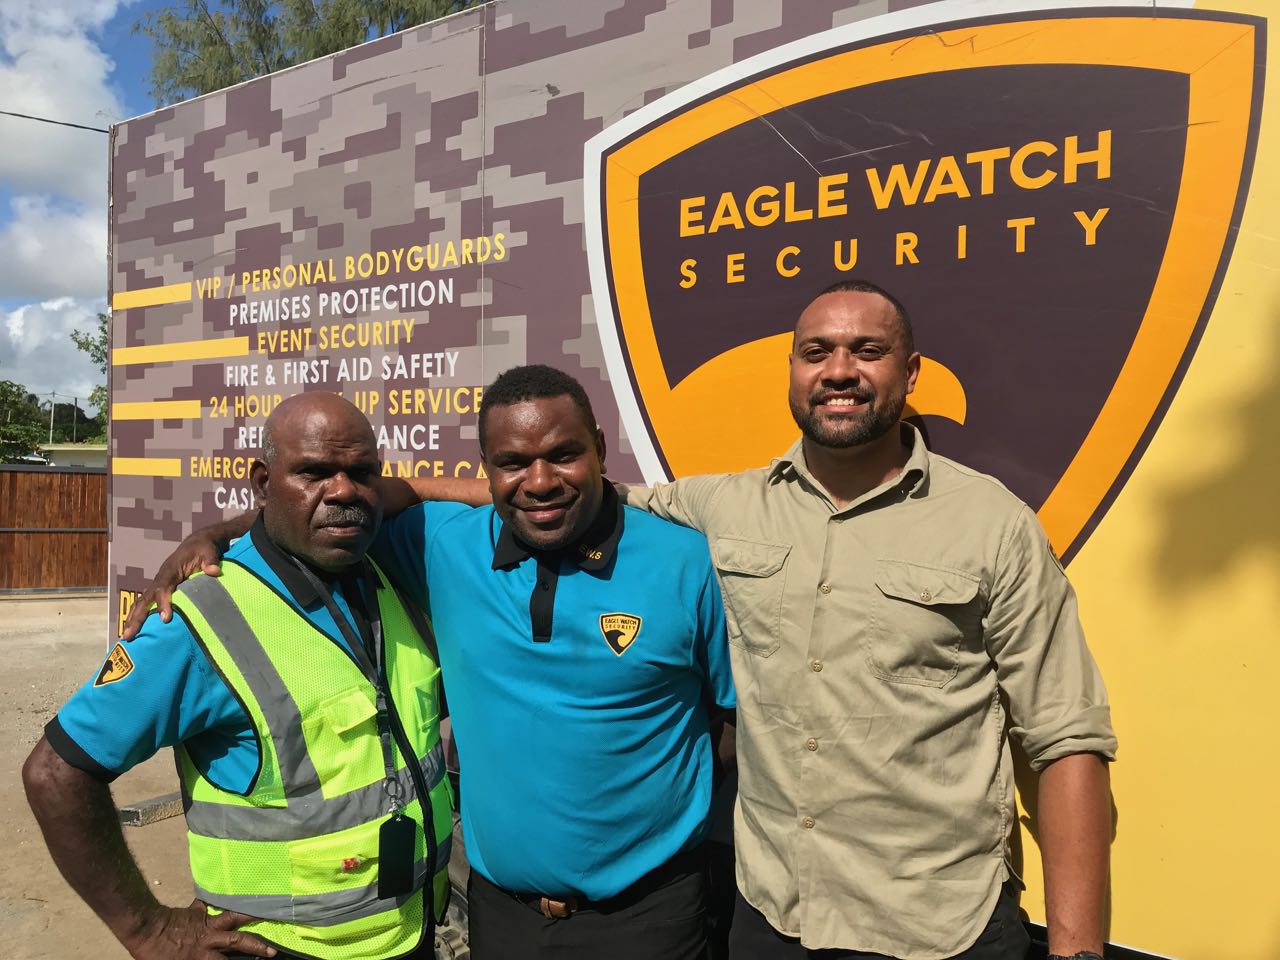 Eagle Watch security team in front of the company